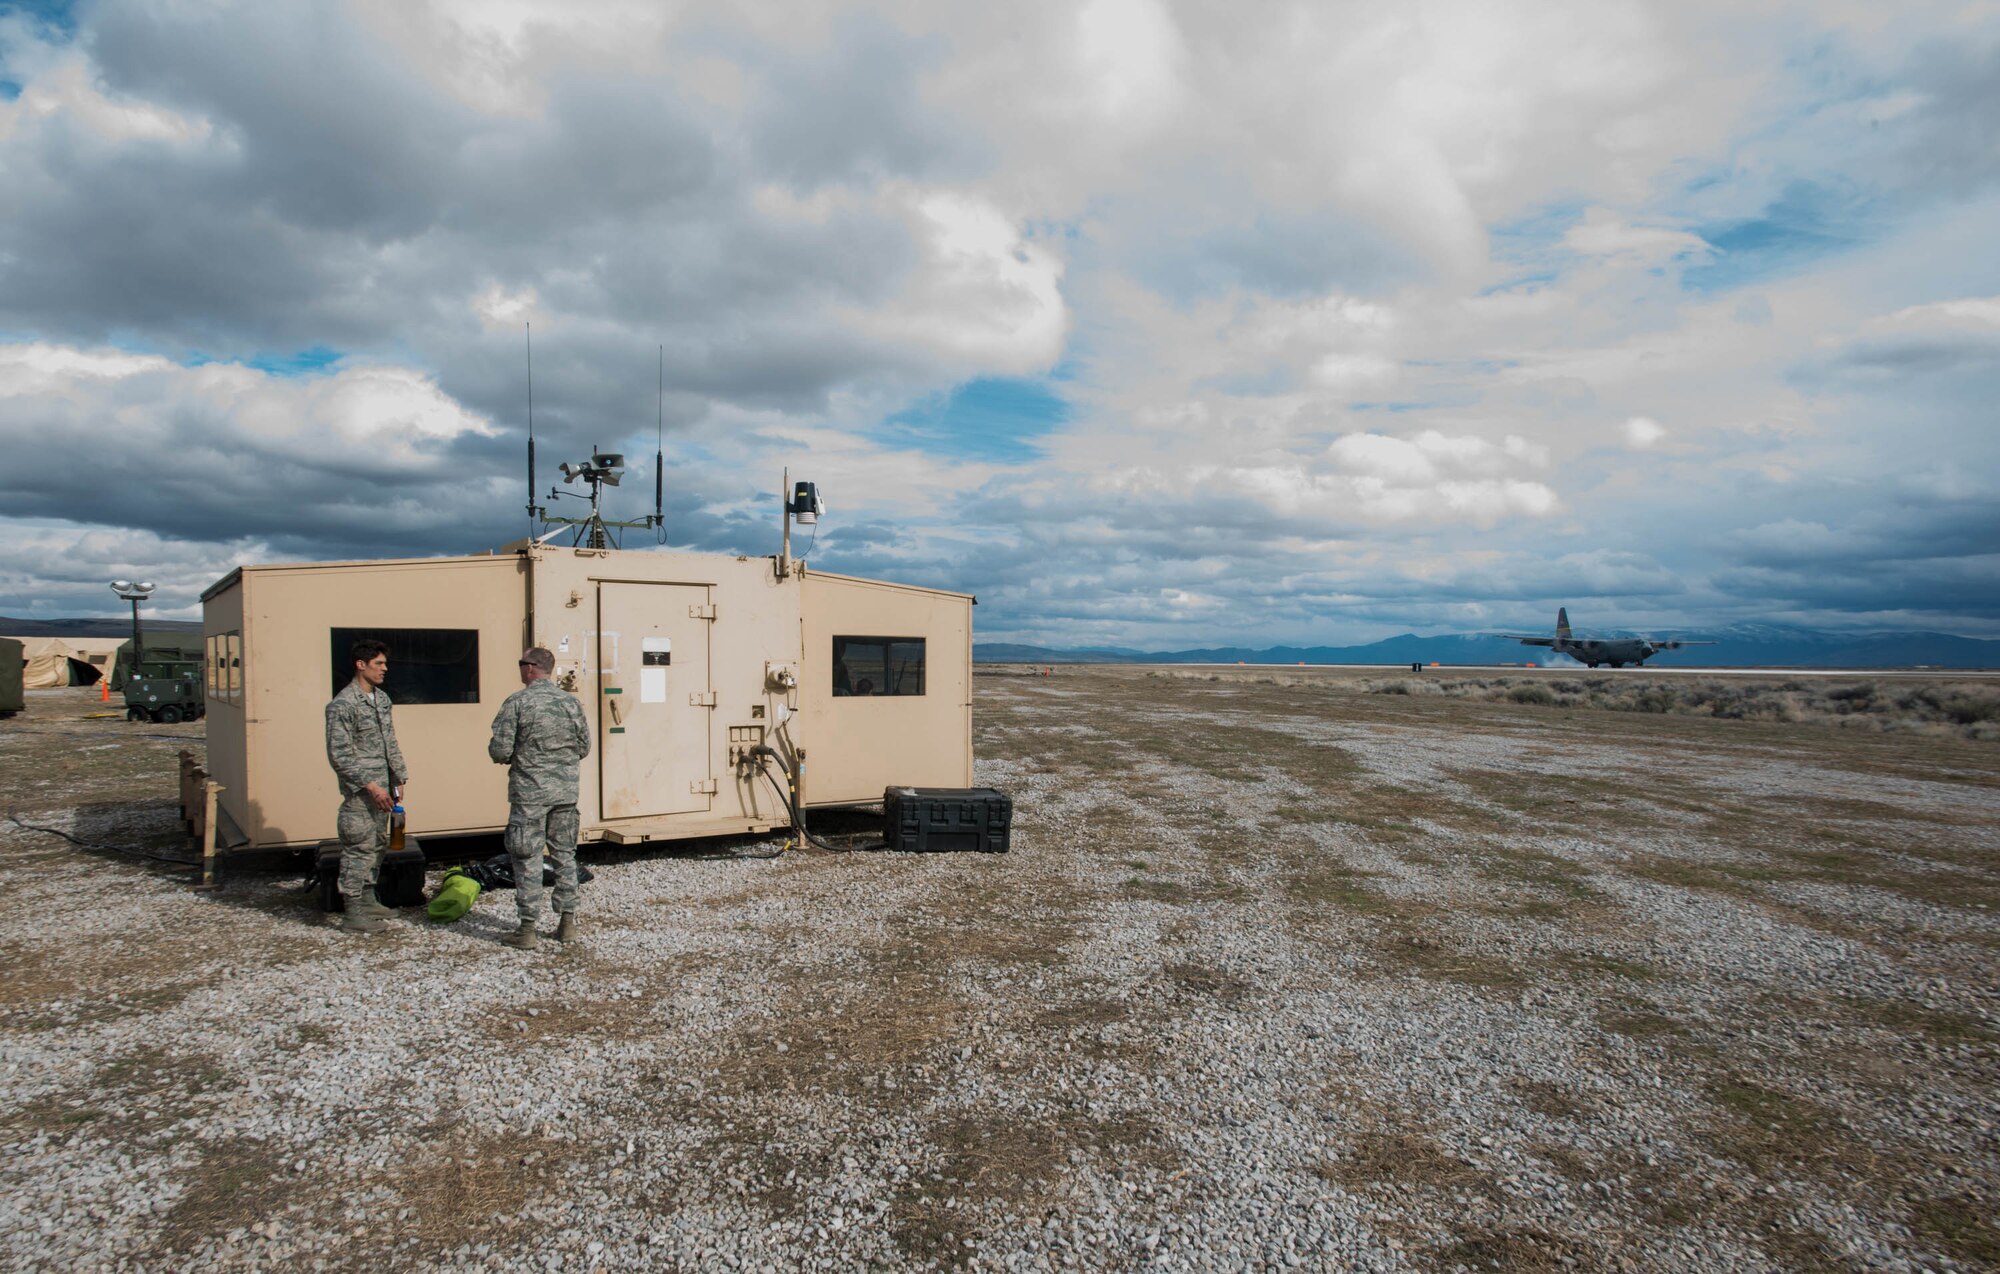 A Wyoming Air National Guard C-130 Hercules lands next to the 123rd Contingency Response Group’s Hardened Expeditionary Light Air Mobile Shelter at Amedee Army Airfield, Calif., during Operation Lumberjack on March 9, 2016. The 123rd CRG, a unit of the Kentucky Air National Guard, is working in conjunction with the U.S. Army’s 688th Rapid Port Opening Element and a team from the Defense Logistics Agency to operate Joint Task Force-Port Opening Sangala during the week-long exercise. The objective of the JTF-PO is to establish an aerial port of debarkation, provide initial distribution capability and set up warehousing capability for distribution beyond a forward node. (Kentucky Air National Guard photo by Master Sgt. Phil Speck)